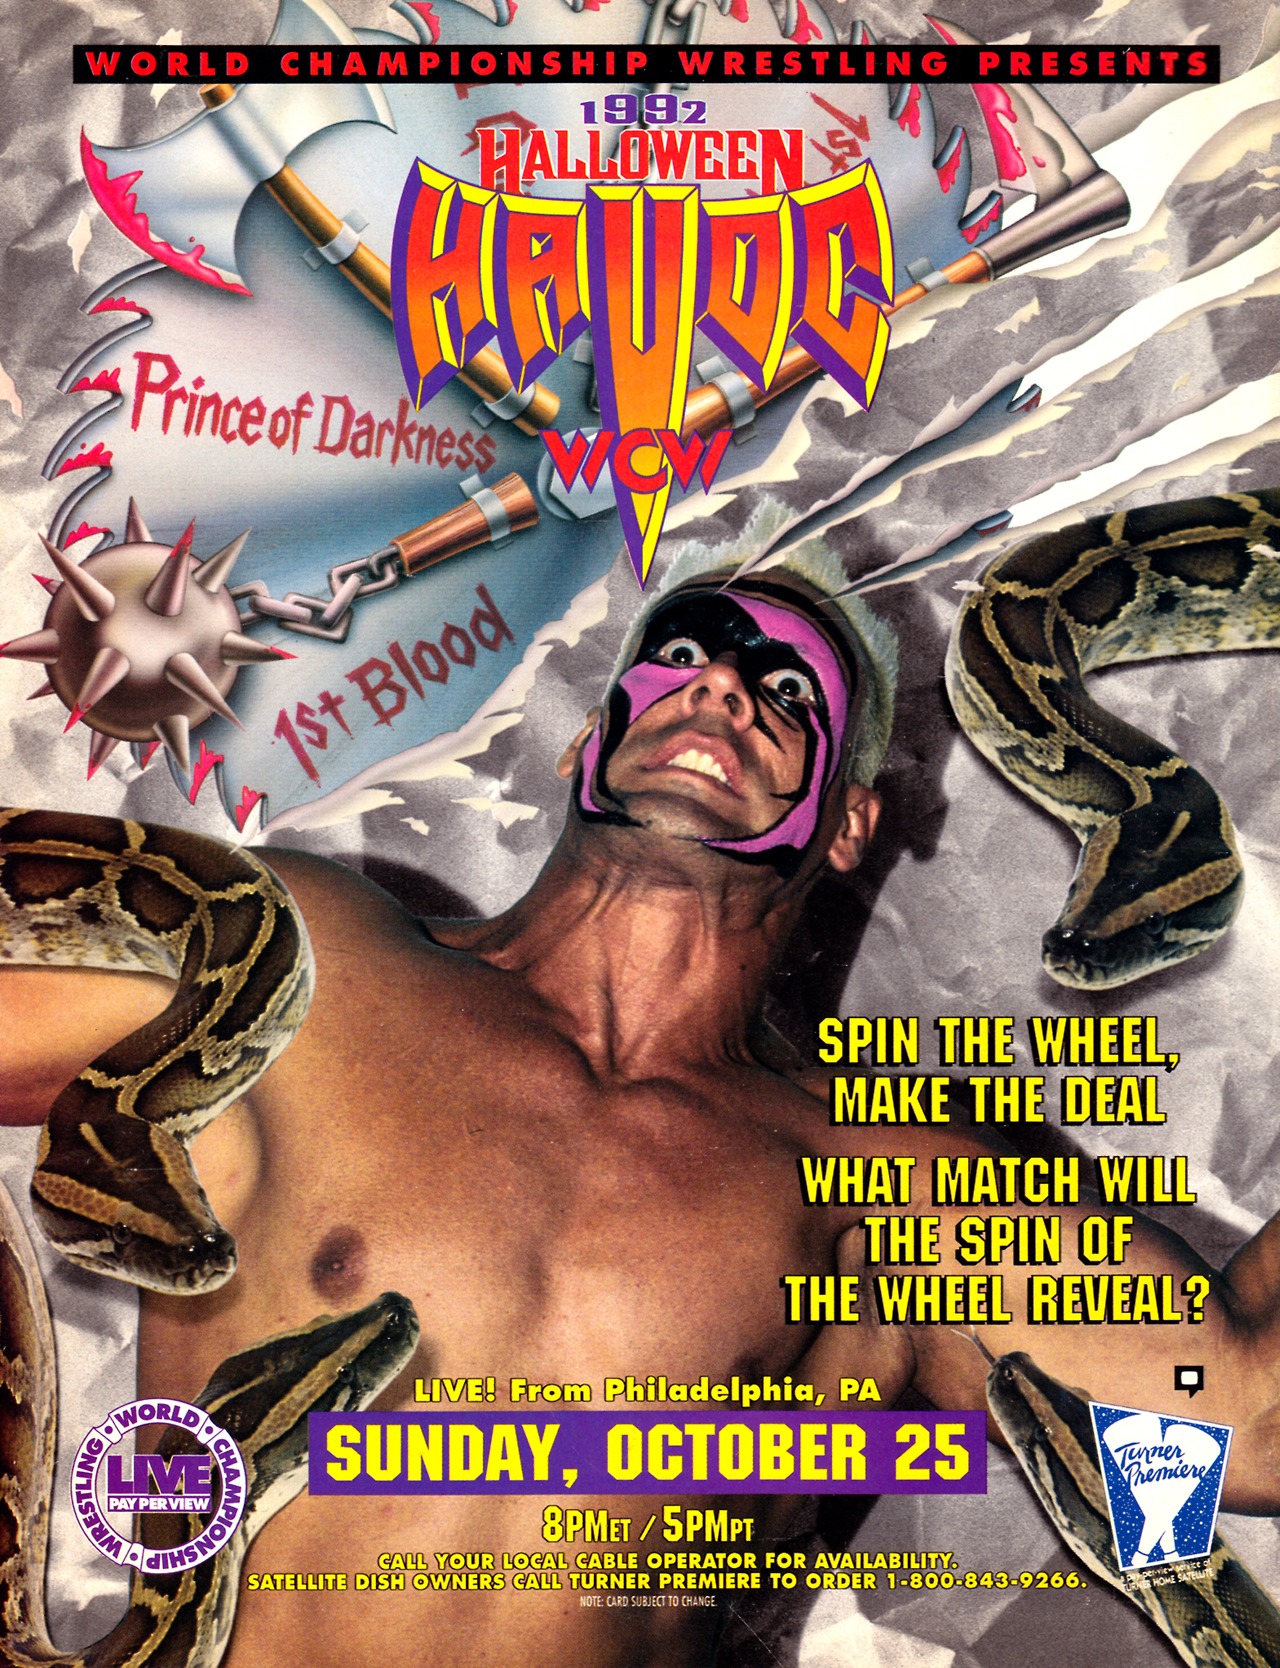 The Wrestling Insomniac: The Matches of Halloween Havoc (1989-1994)